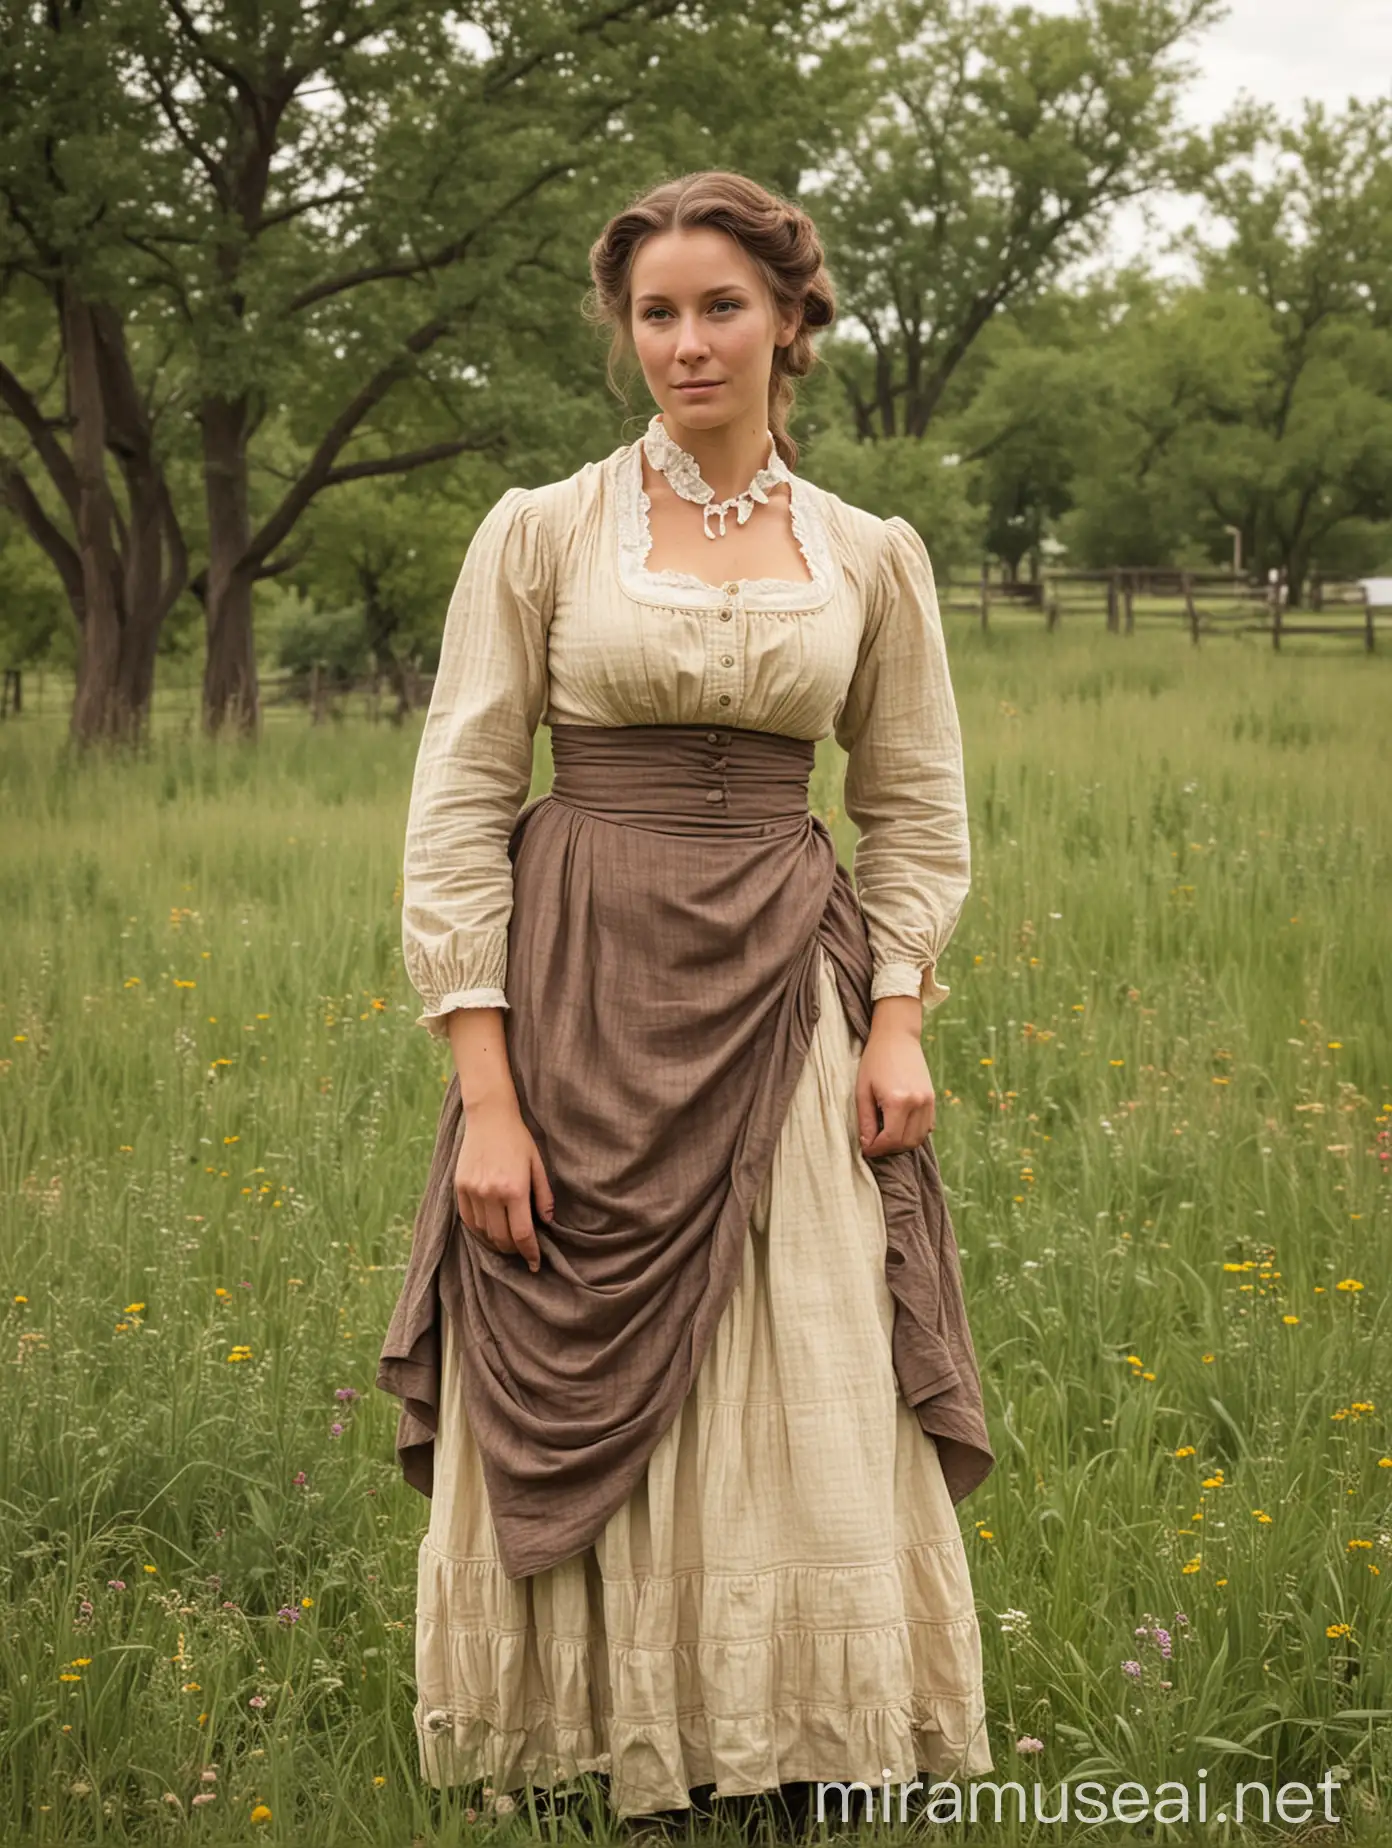 Beautiful wife, homestead, prairie, 1800s, color, sexy